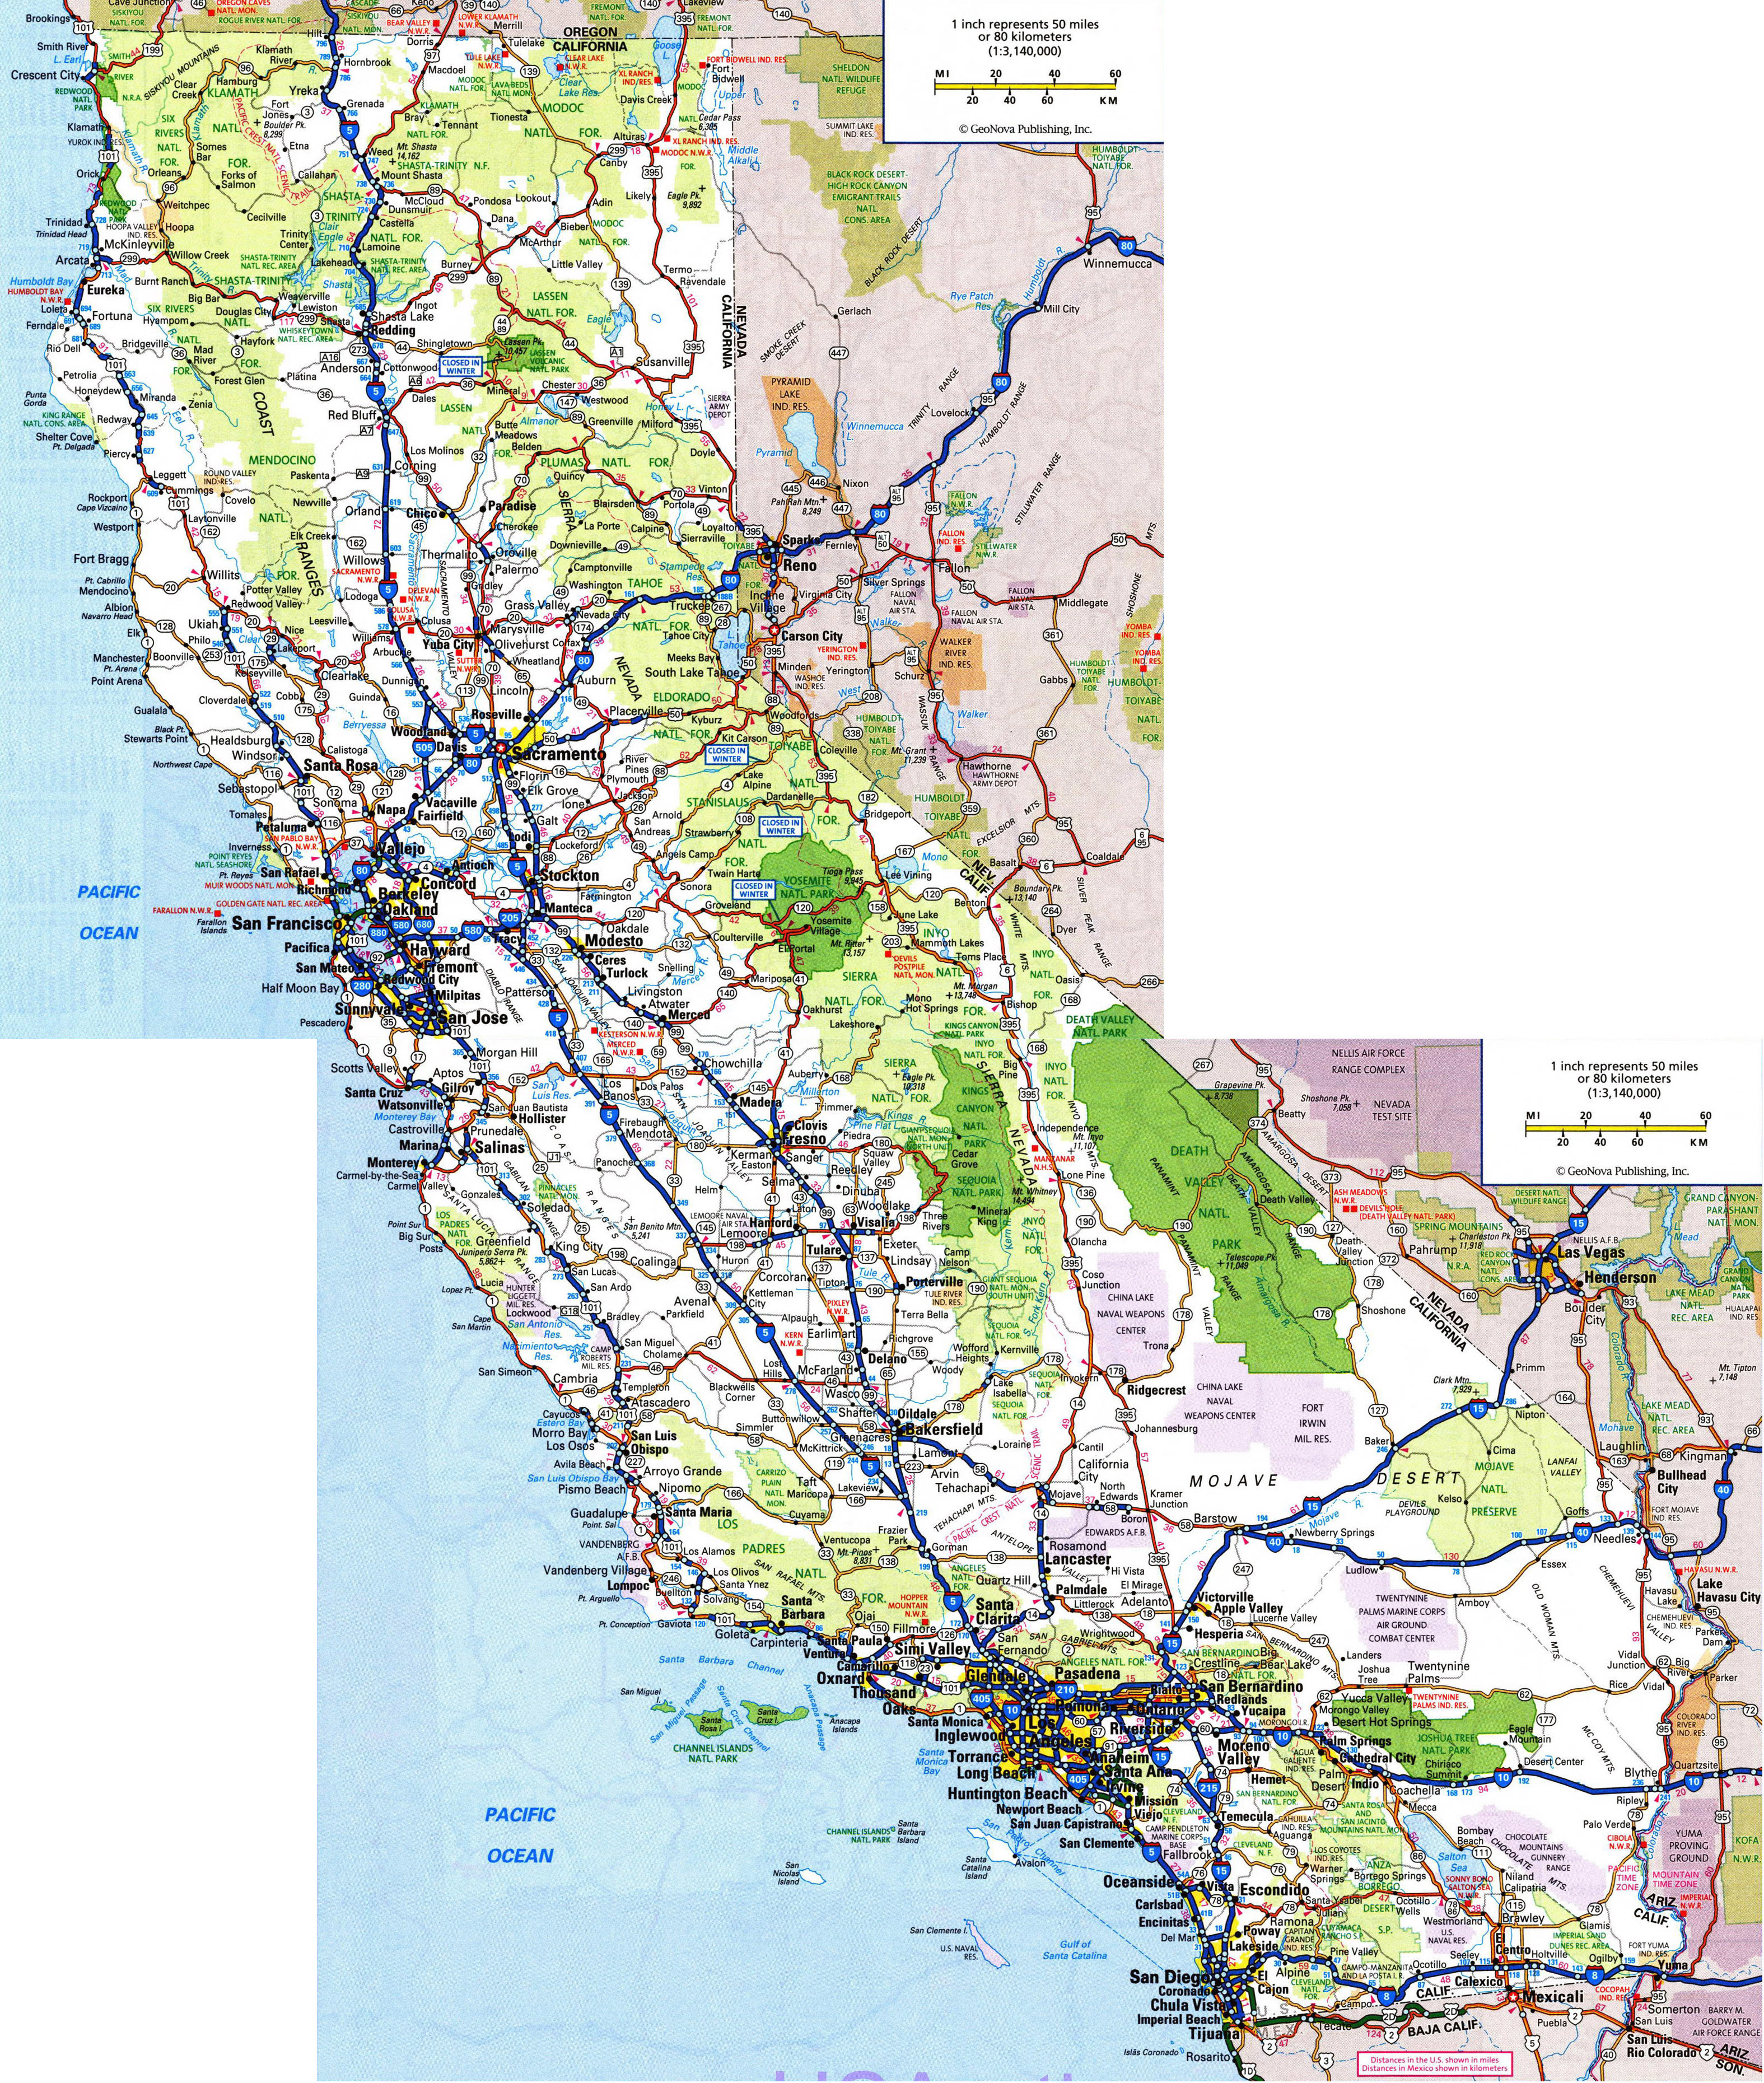 Northern California Map Cities - Klipy - Northern California State Parks Map